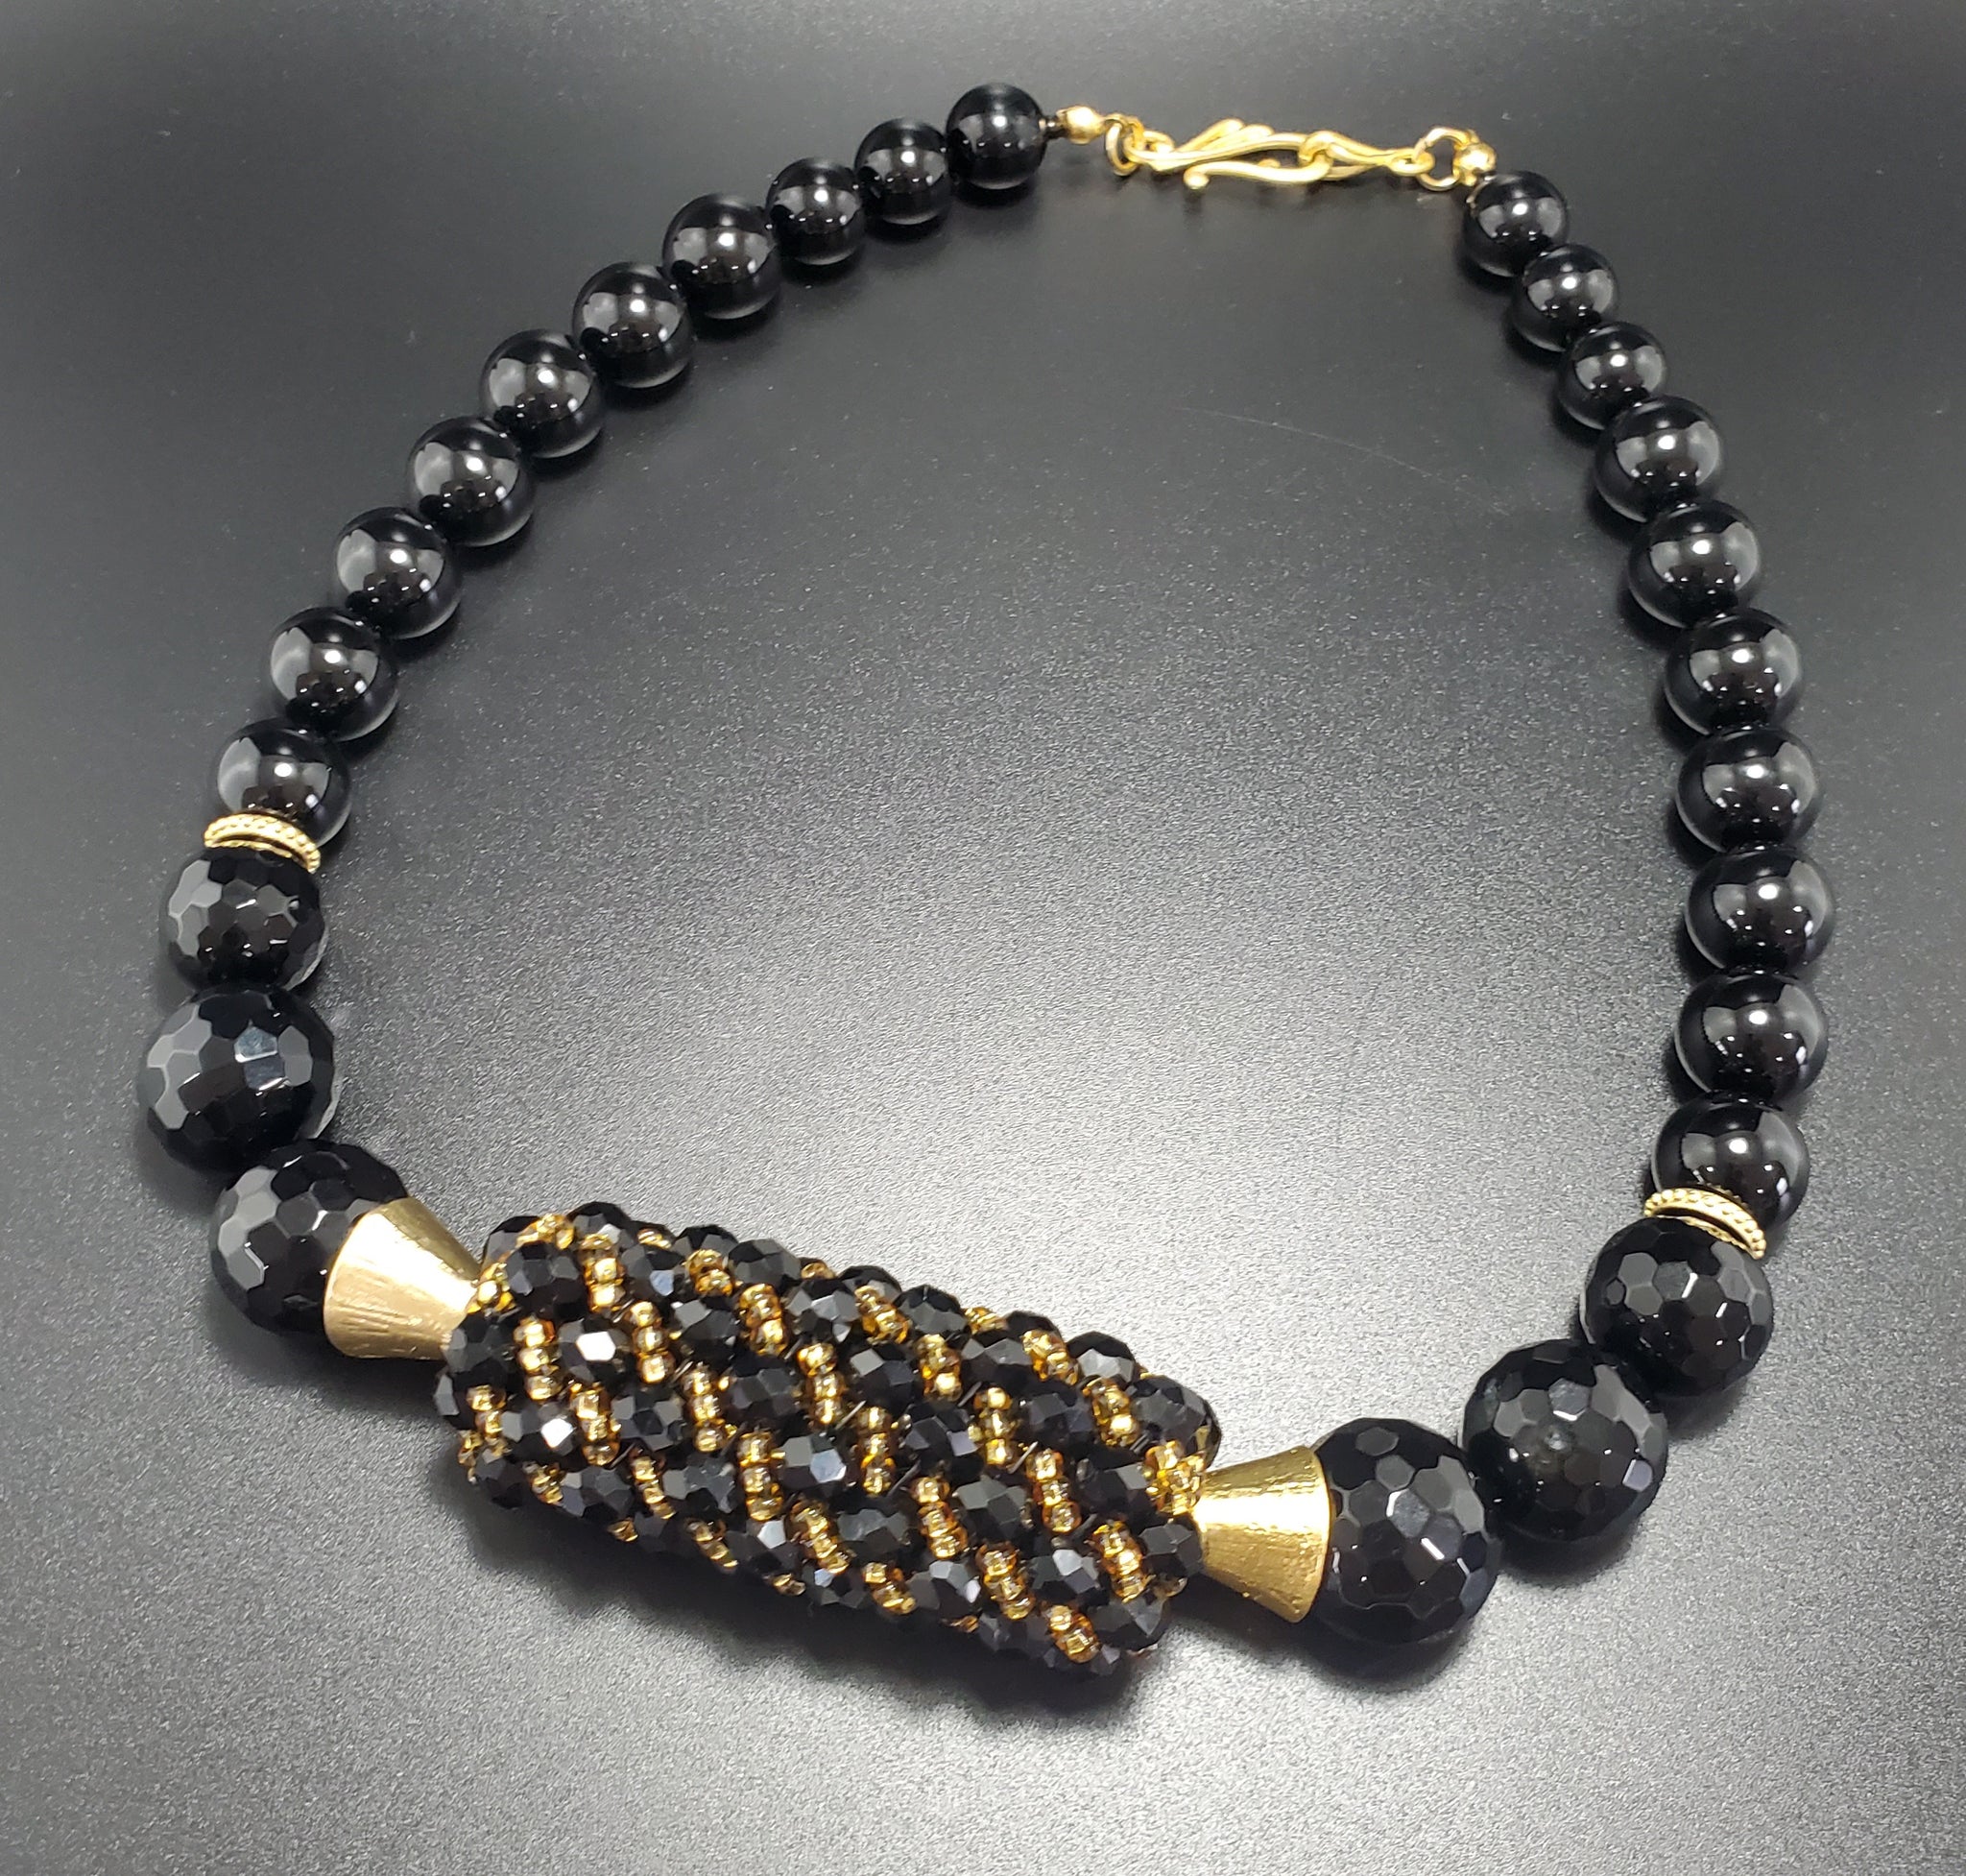 Black Onyx Beads, Faceted Glass Beads, 22K Gold Plated Brass, Topaz Czech Seed Beads, Woven Bar Necklace